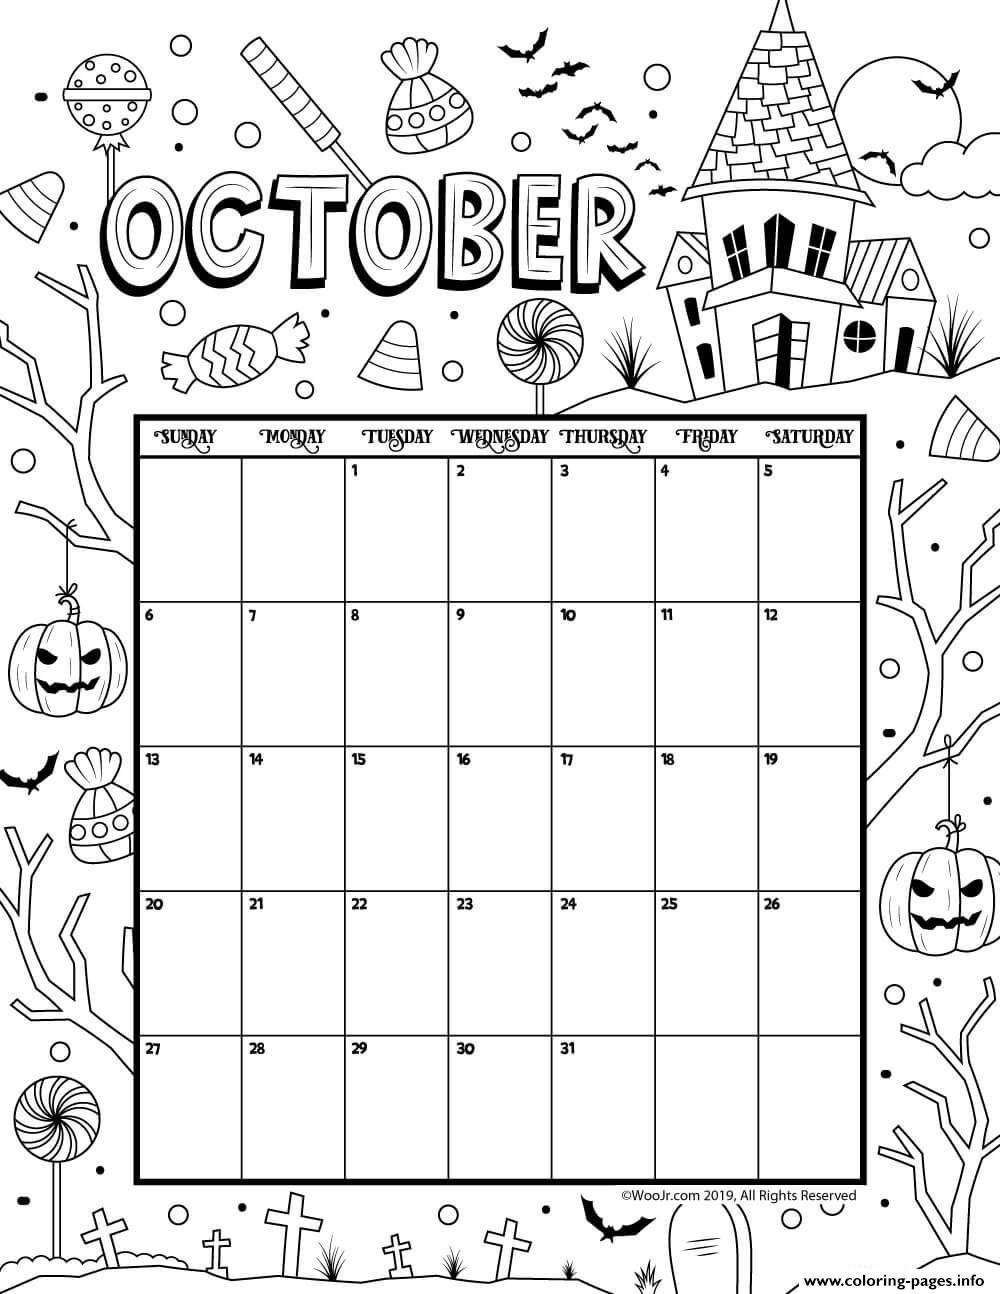 Download October Coloring Calendar 2019 Coloring Pages Printable